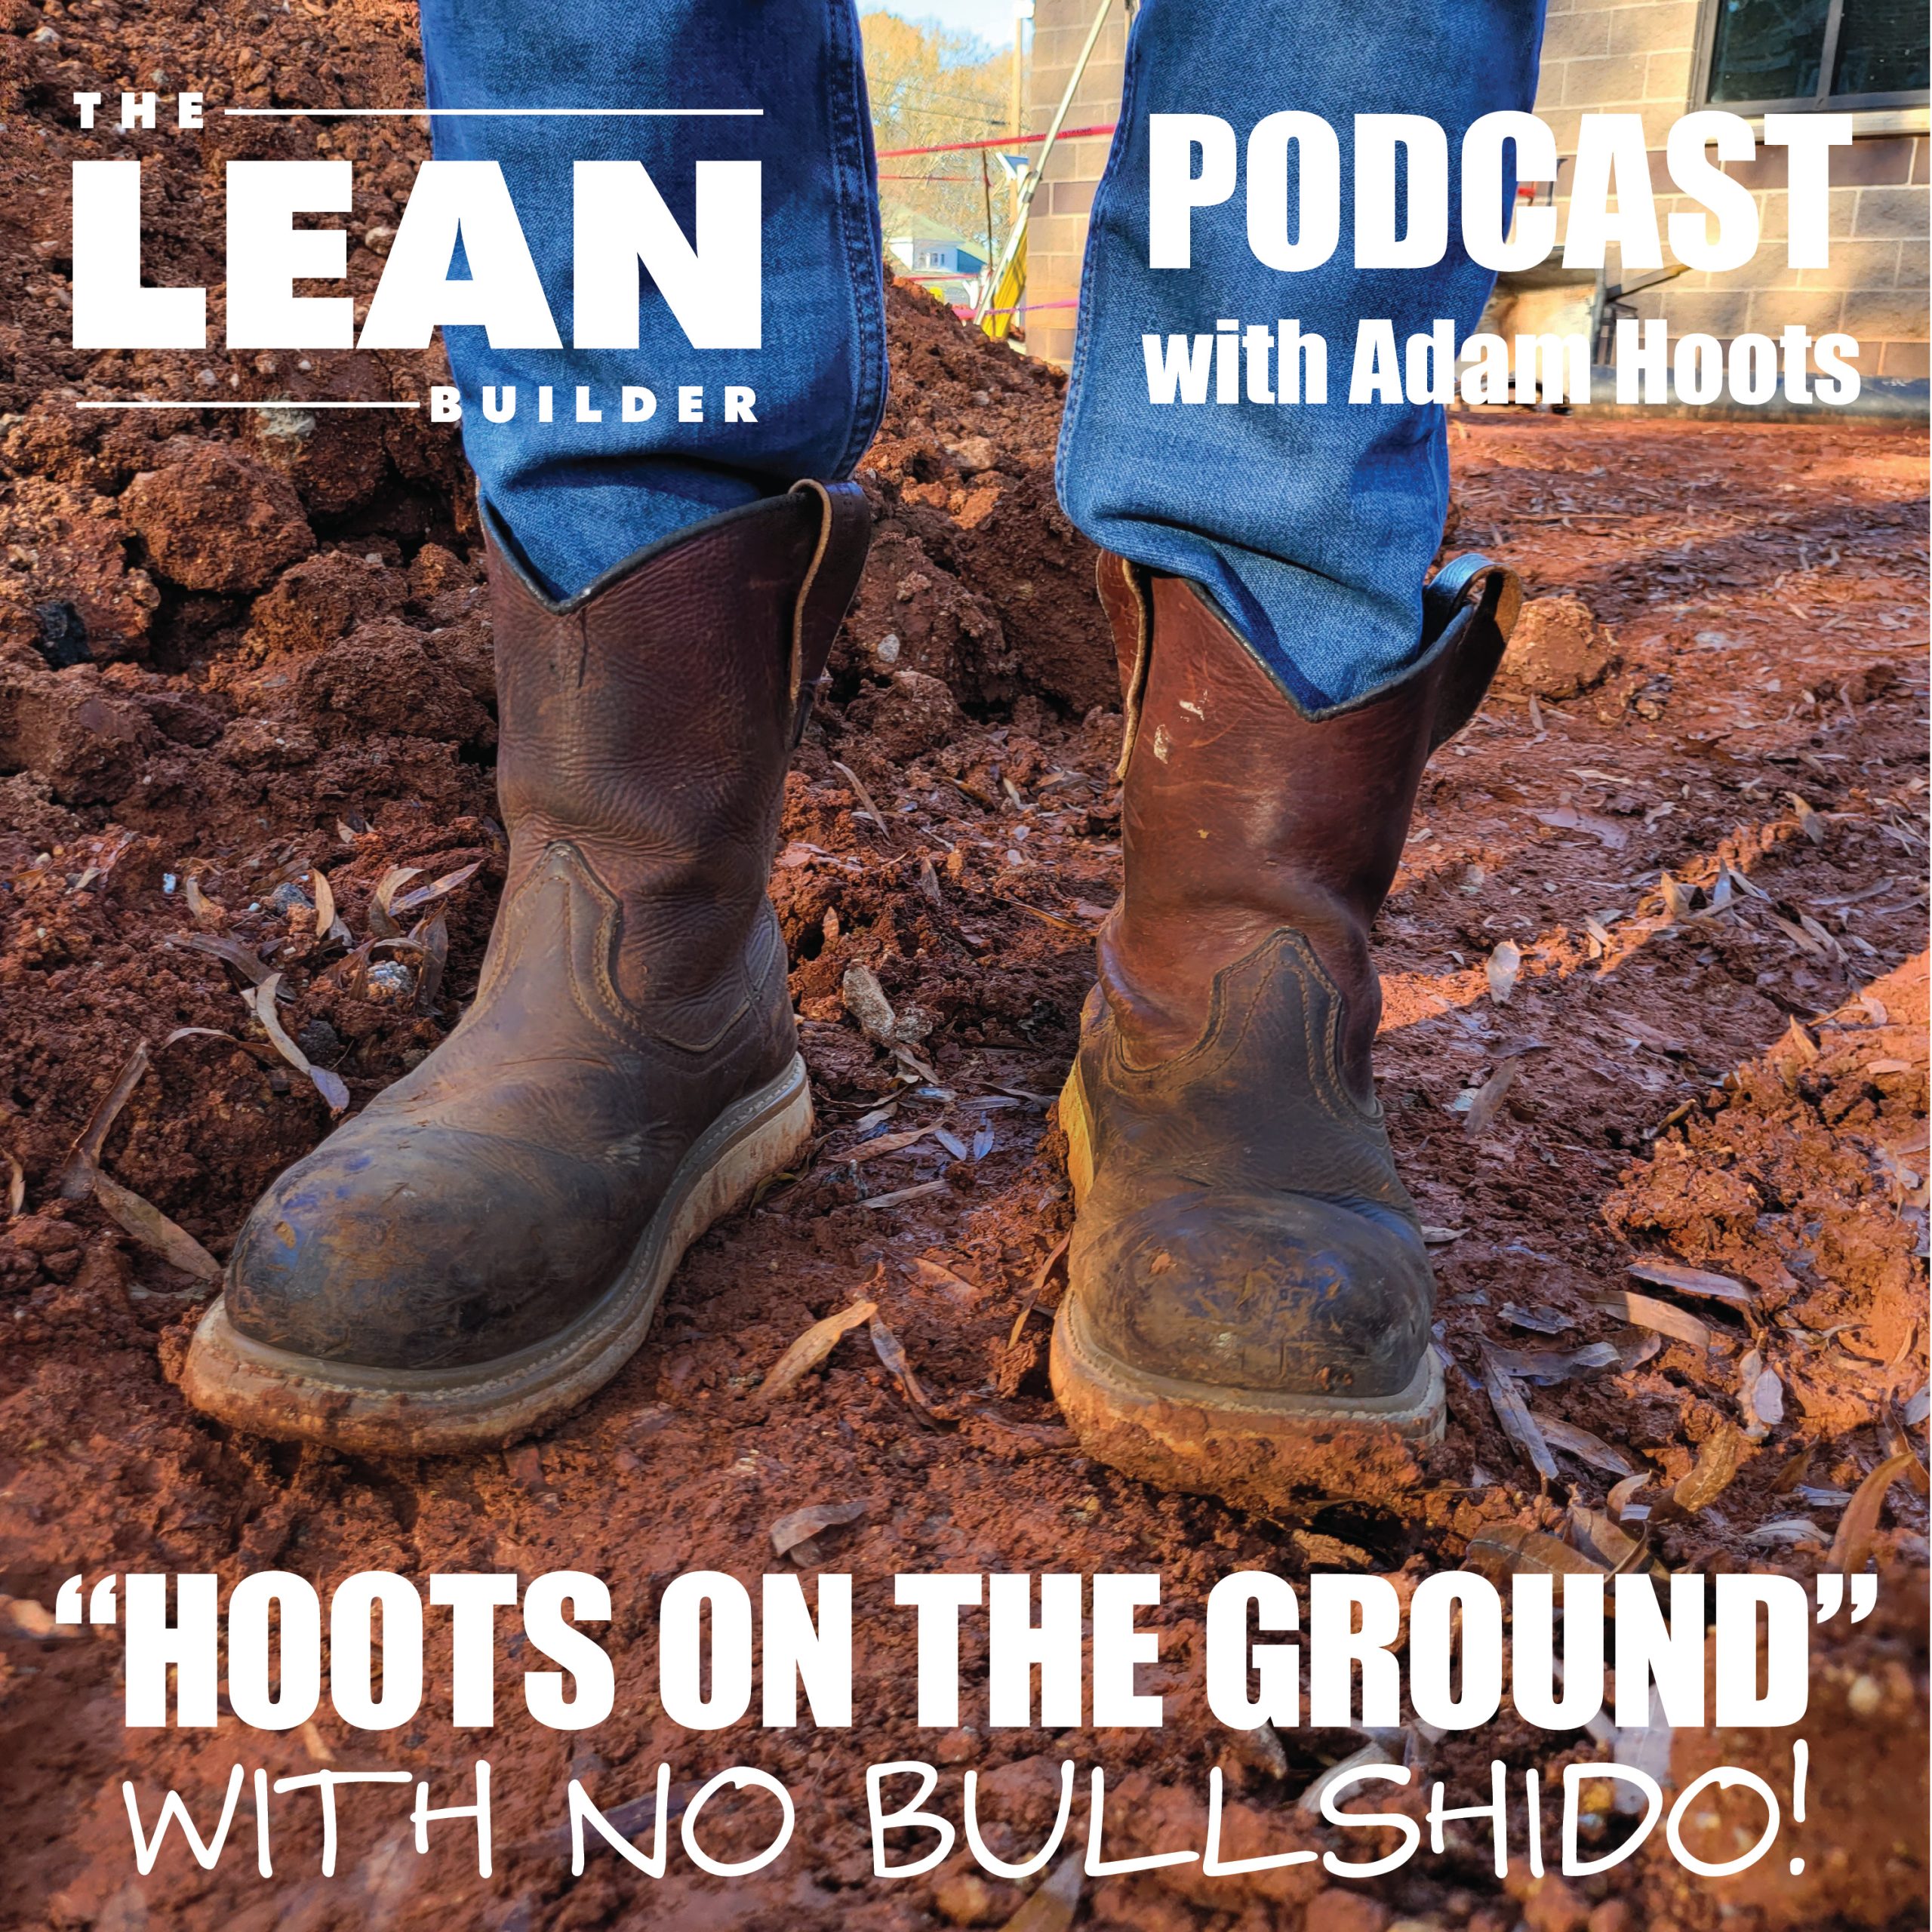 The Lean Builder Podcast - Hoots on the Ground - Lean Construction Resources